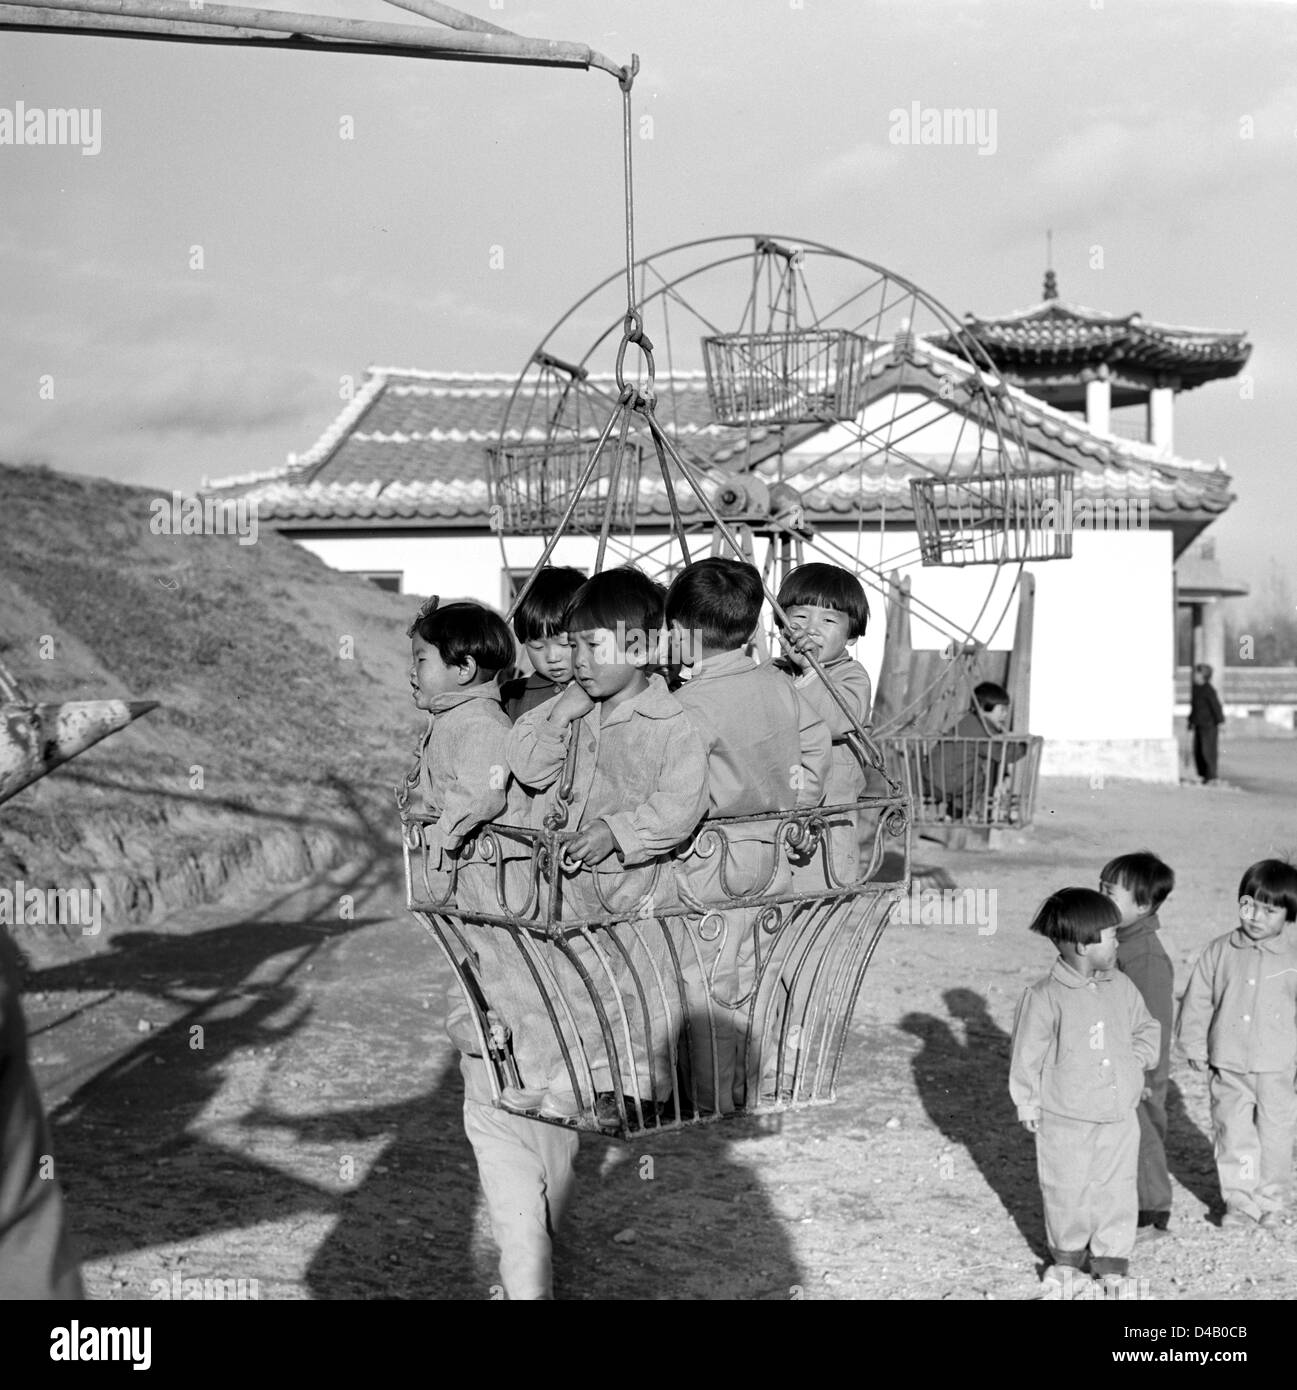 Children in unit clothes play on a playground in a LPG kindergarten near the harbour city Hamhung in the Korean Democratic People's Republic, photographed on the 6th of November in 1971.     Photo: ddrbildarchiv.de / Klaus Morgenstern - GESPERRT FÜR BILDFUNK Stock Photo